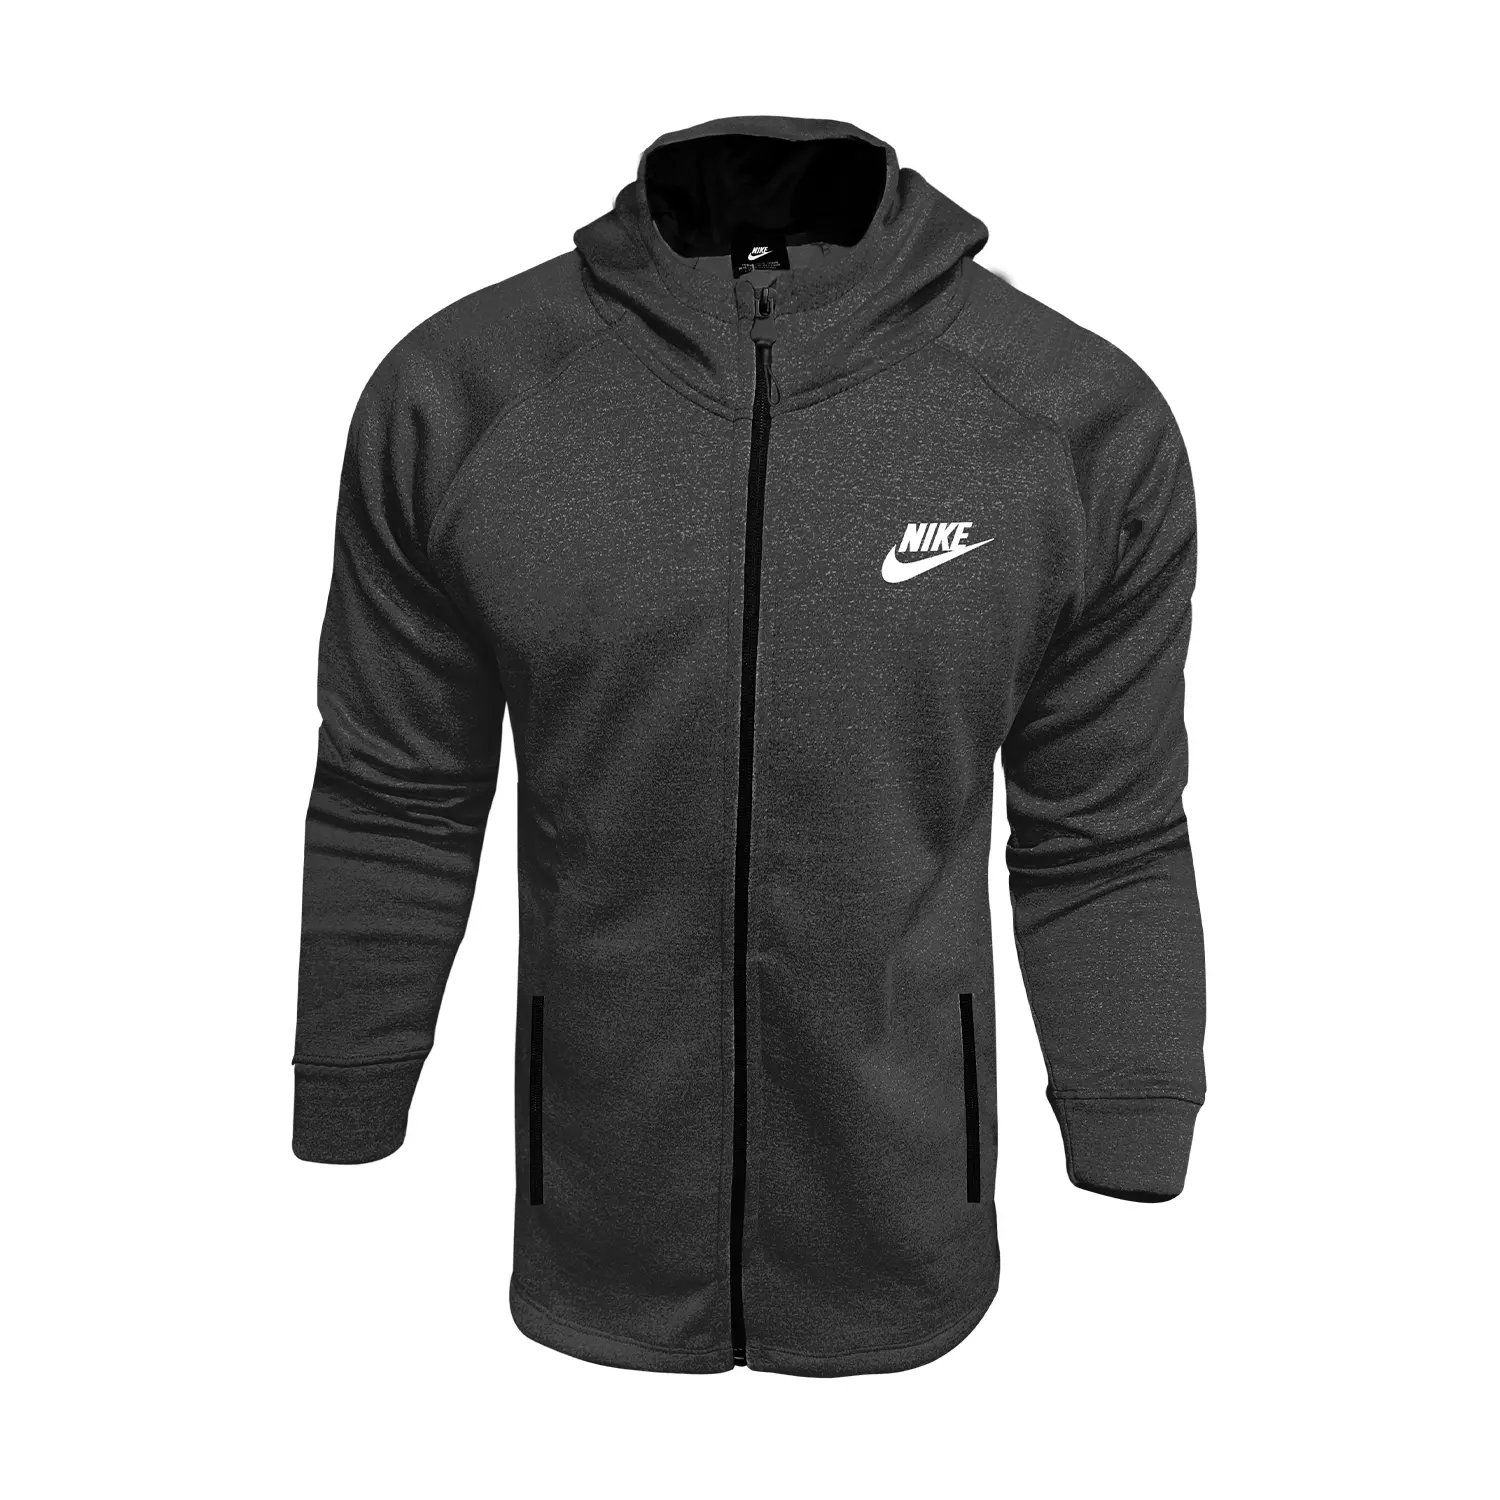 <p><strong>NIKE</strong></p><p style="text-align: center"><strong><span style="color: rgb(161, 161, 161)">TRAINING JACKET</span></strong></p>